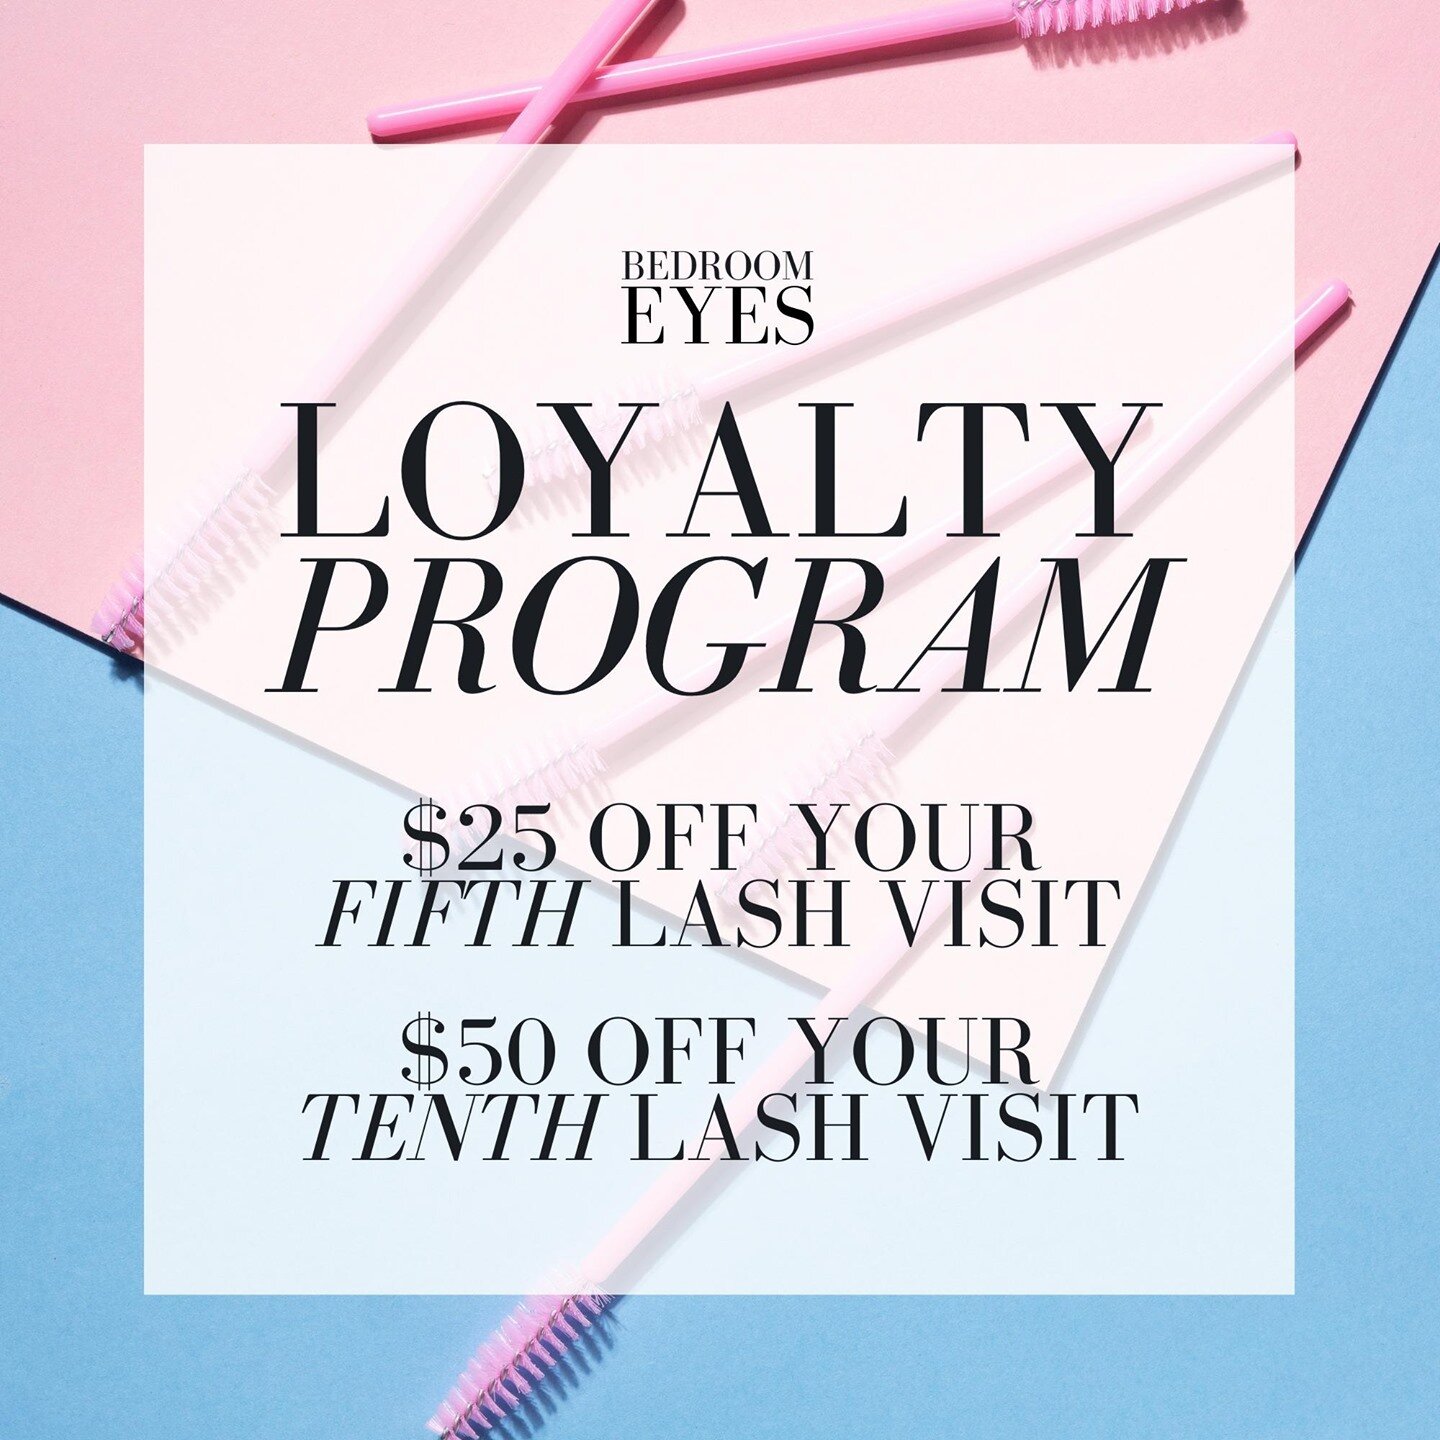 It's not too late to join our Bedroom Eyes Loyalty Program ✨⁠ We'll take $25 off your 5TH lash visit, and $50 off your 10TH. ⁠
⁠
If you have any questions, please feel free to send us a message. ⁠
⁠
⁠
⁠
⁠
⁠
#bedroomeyesmelbourne #bedroomeyesfitzroy #